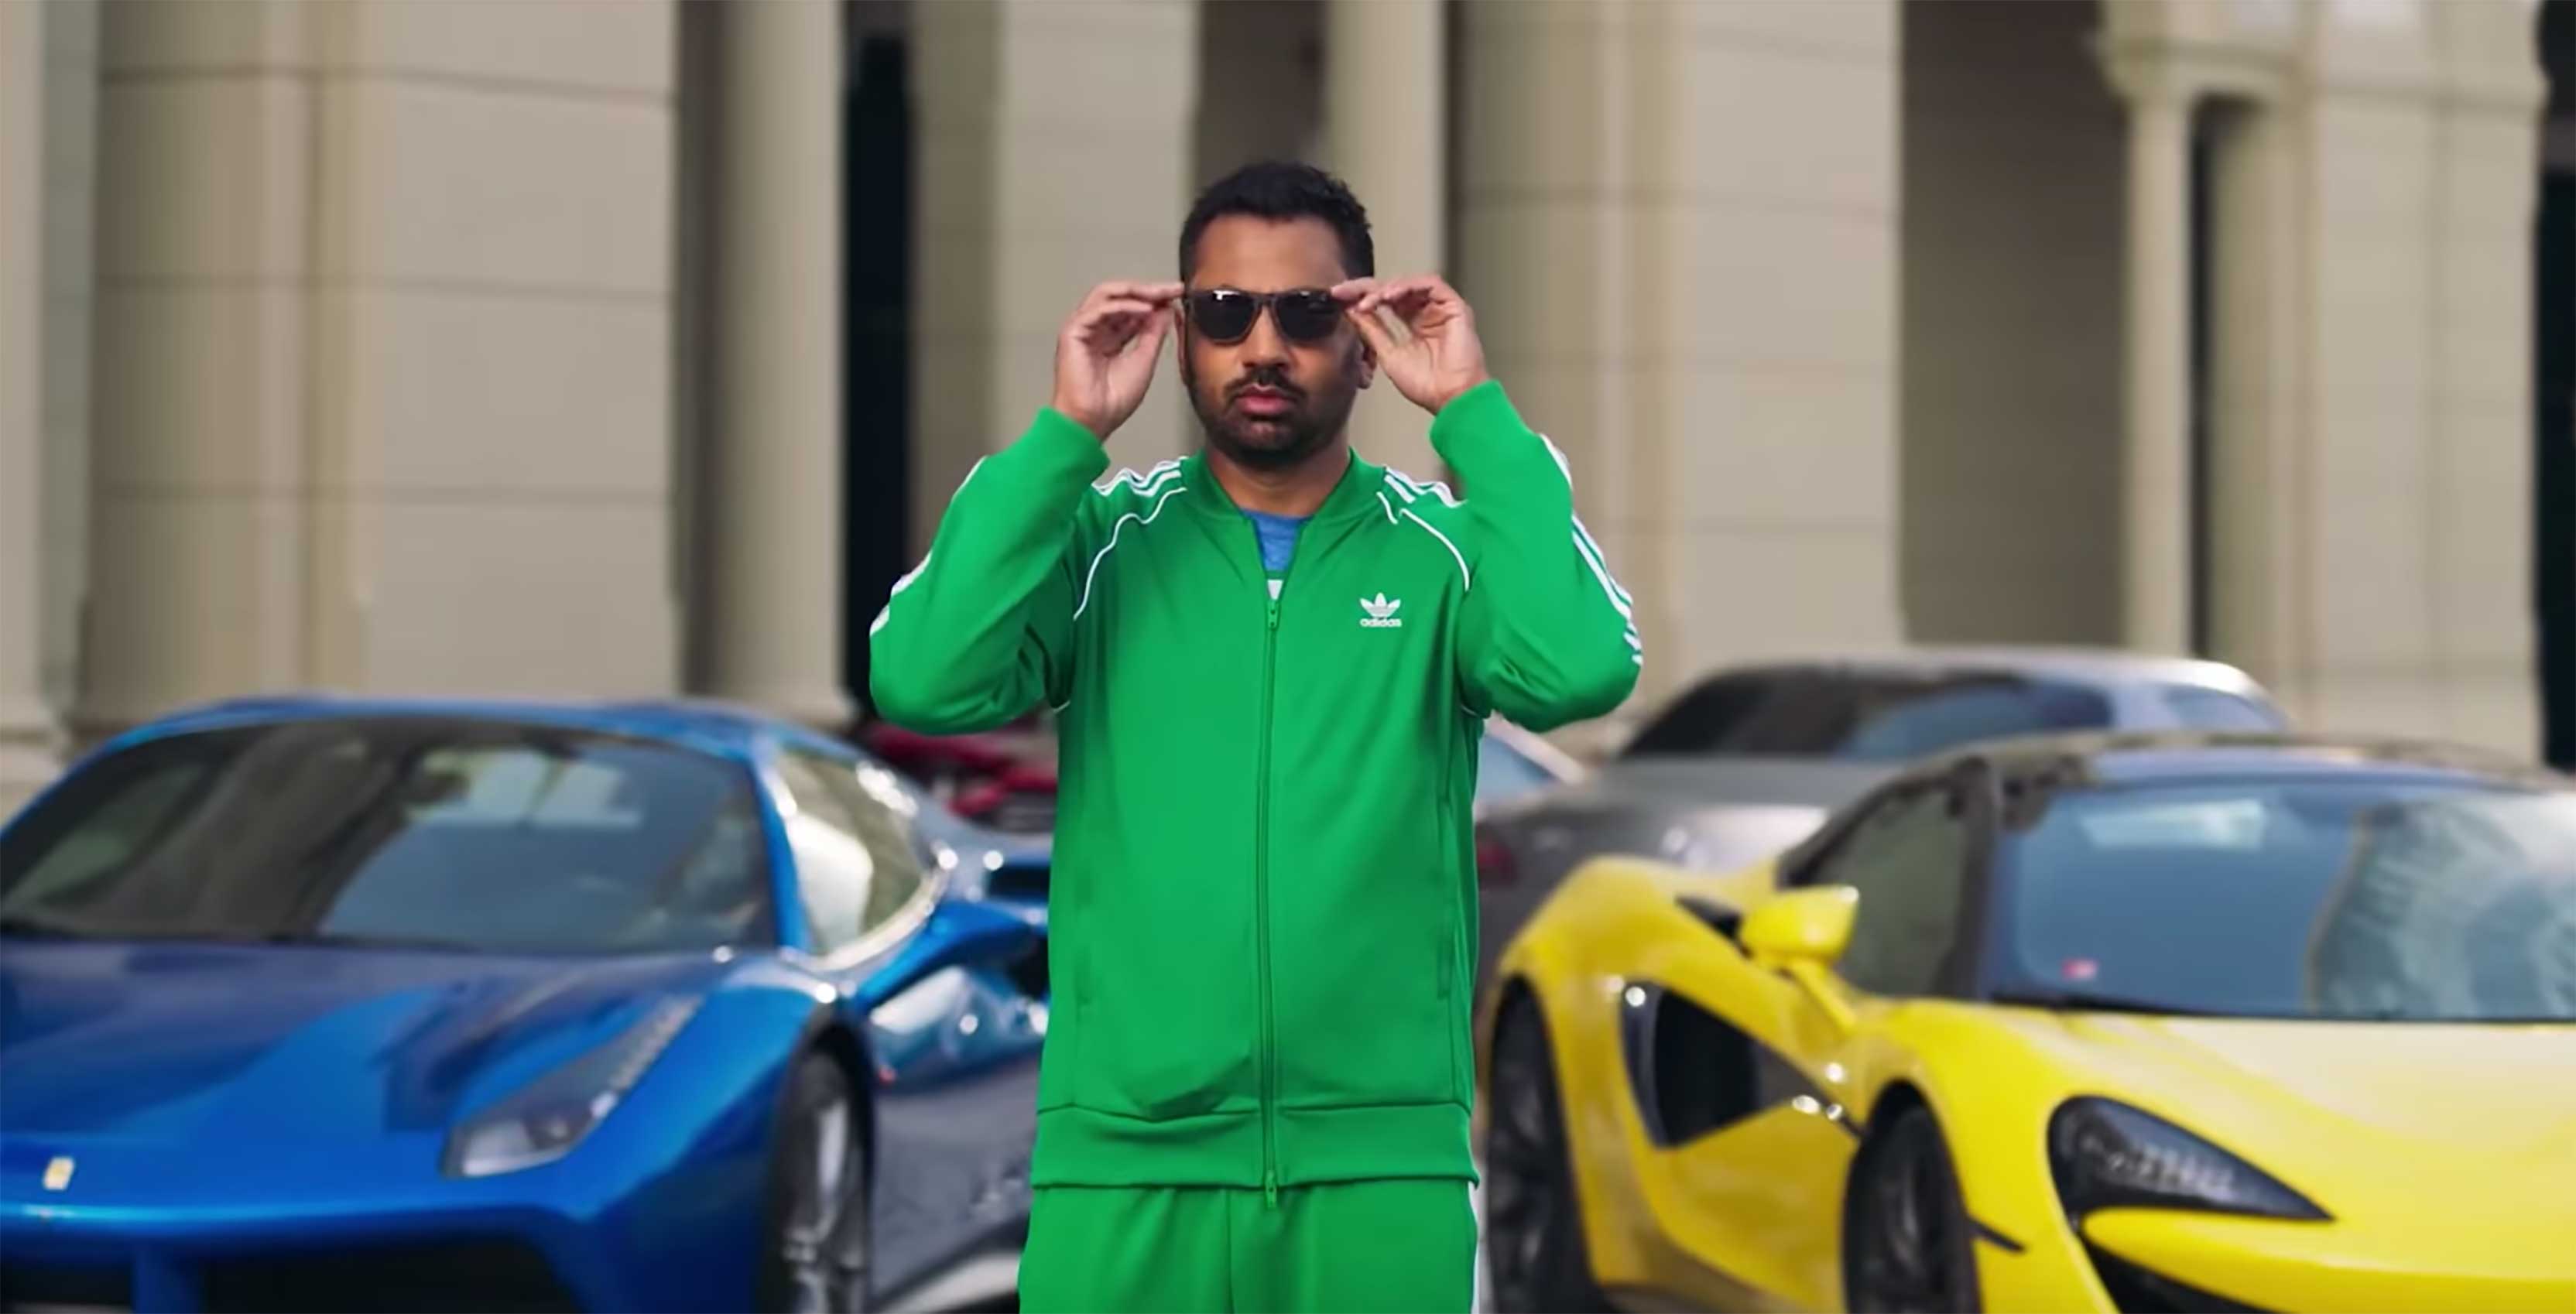 Kal Penn in This Giant Beast That Is The Global Economy